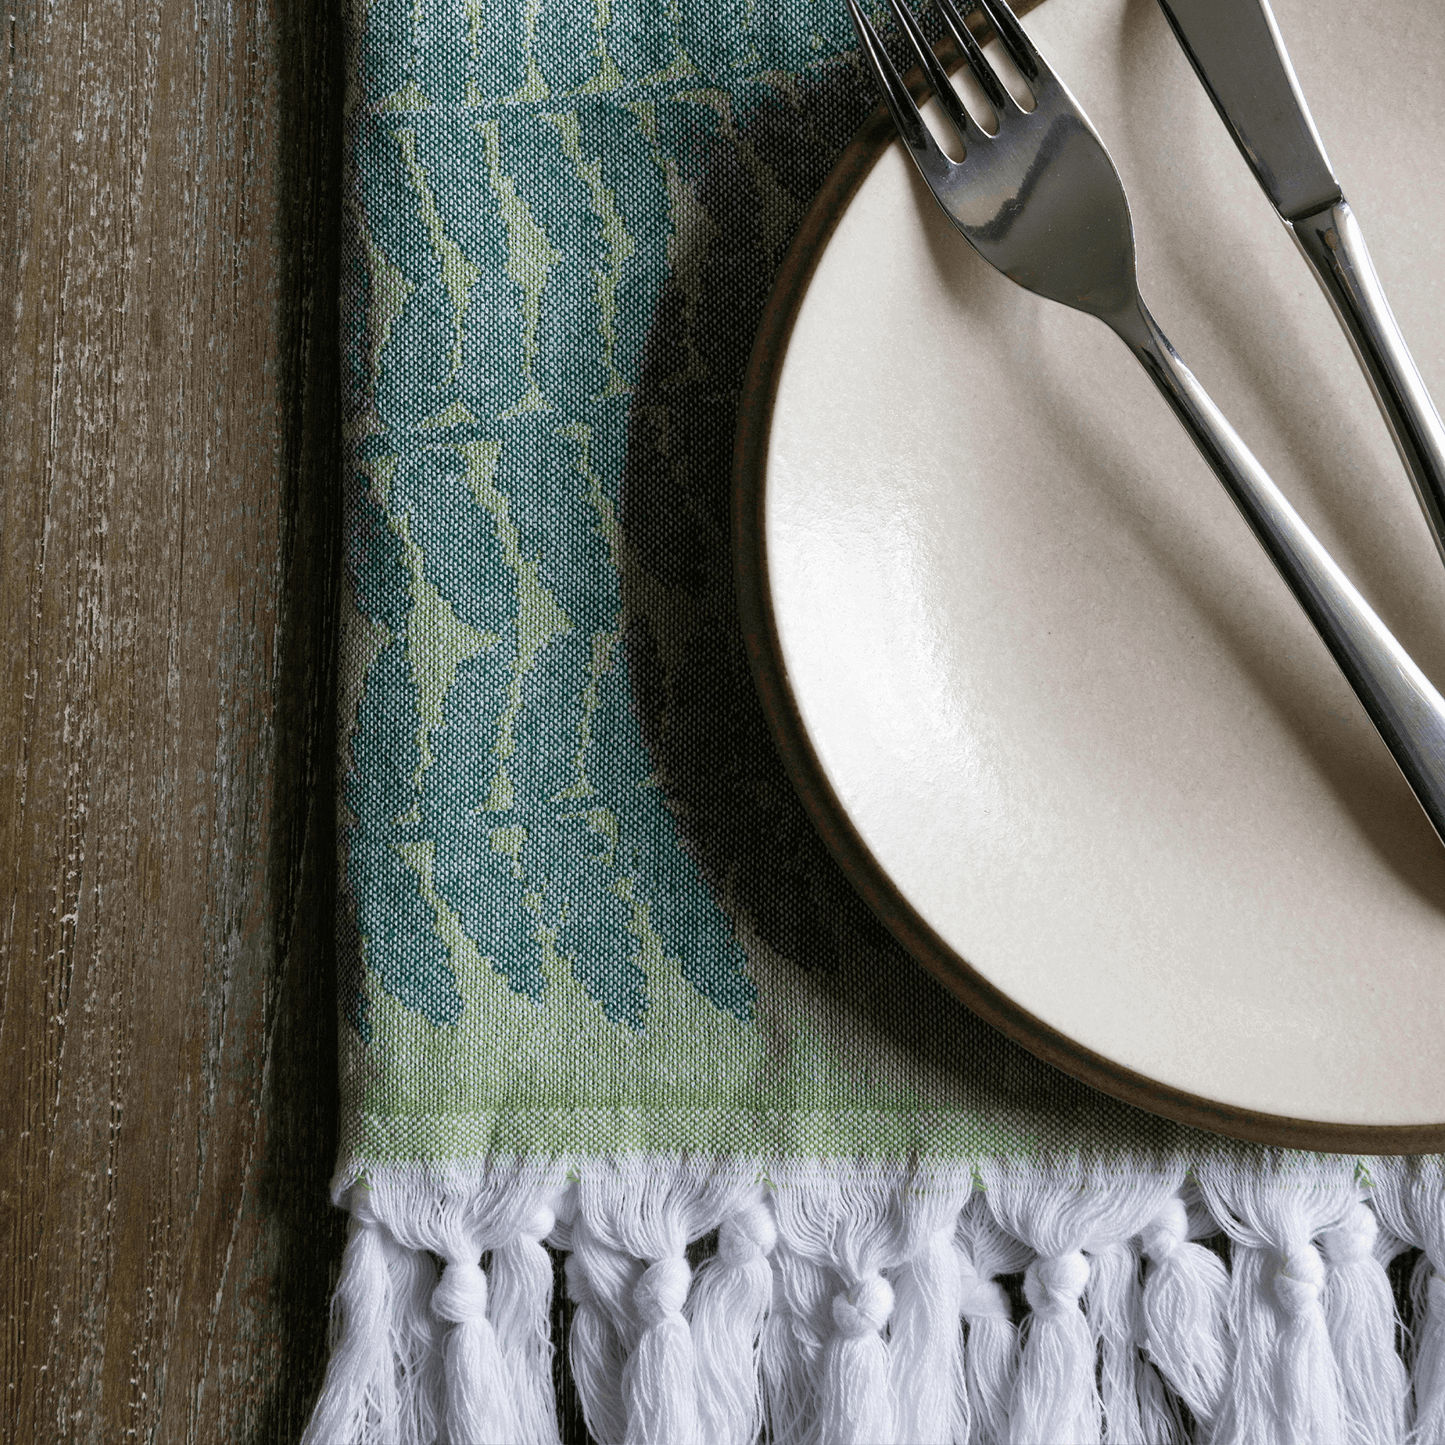 Green Turkish Hand Towel used for dinner